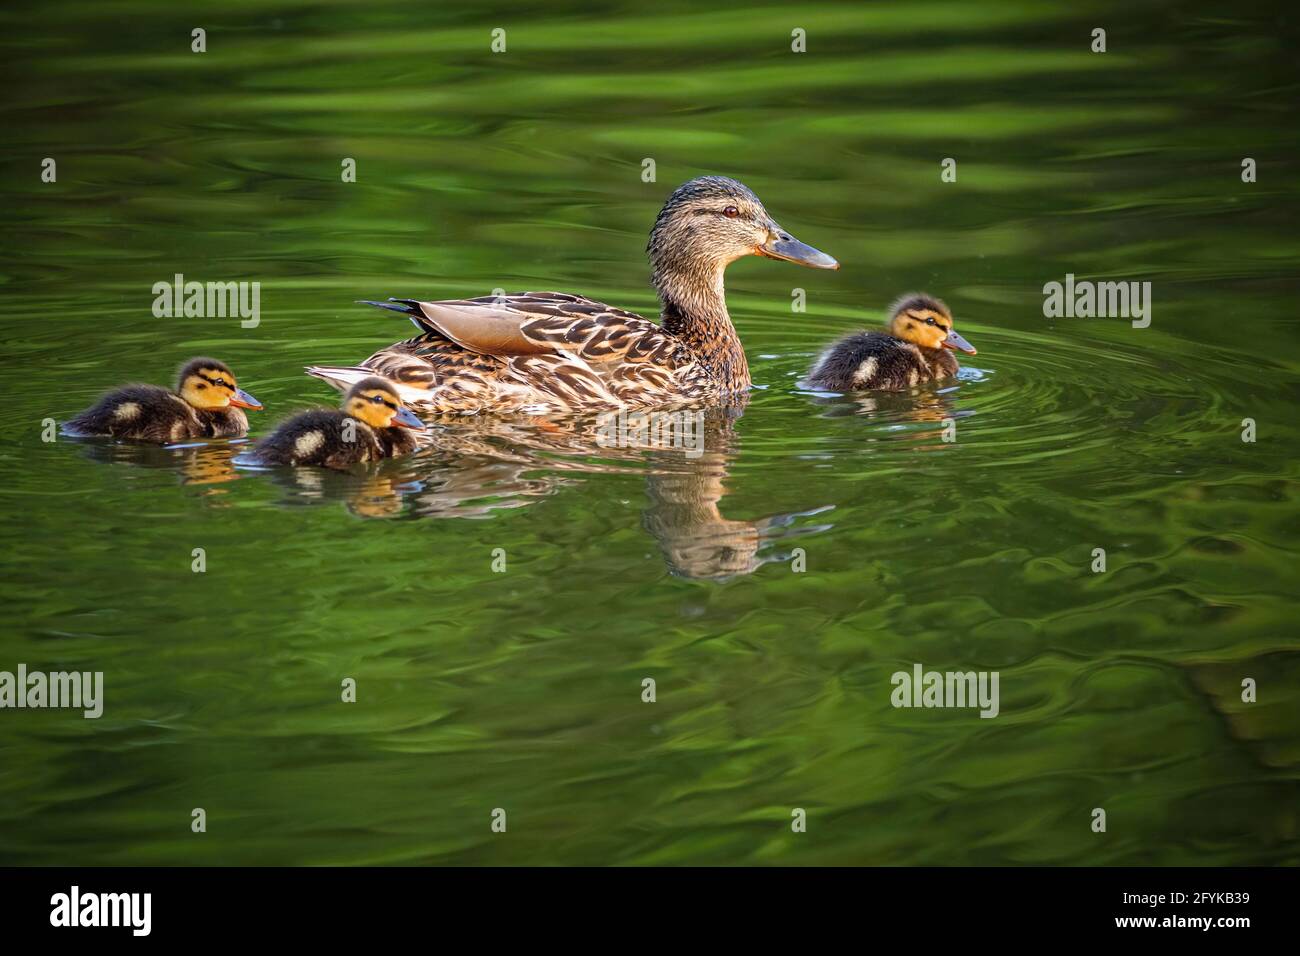 A wild brown mallard duck, a mum with three cute little nestlings swimming in green lake on a spring day. Reflection in the water. Stock Photo